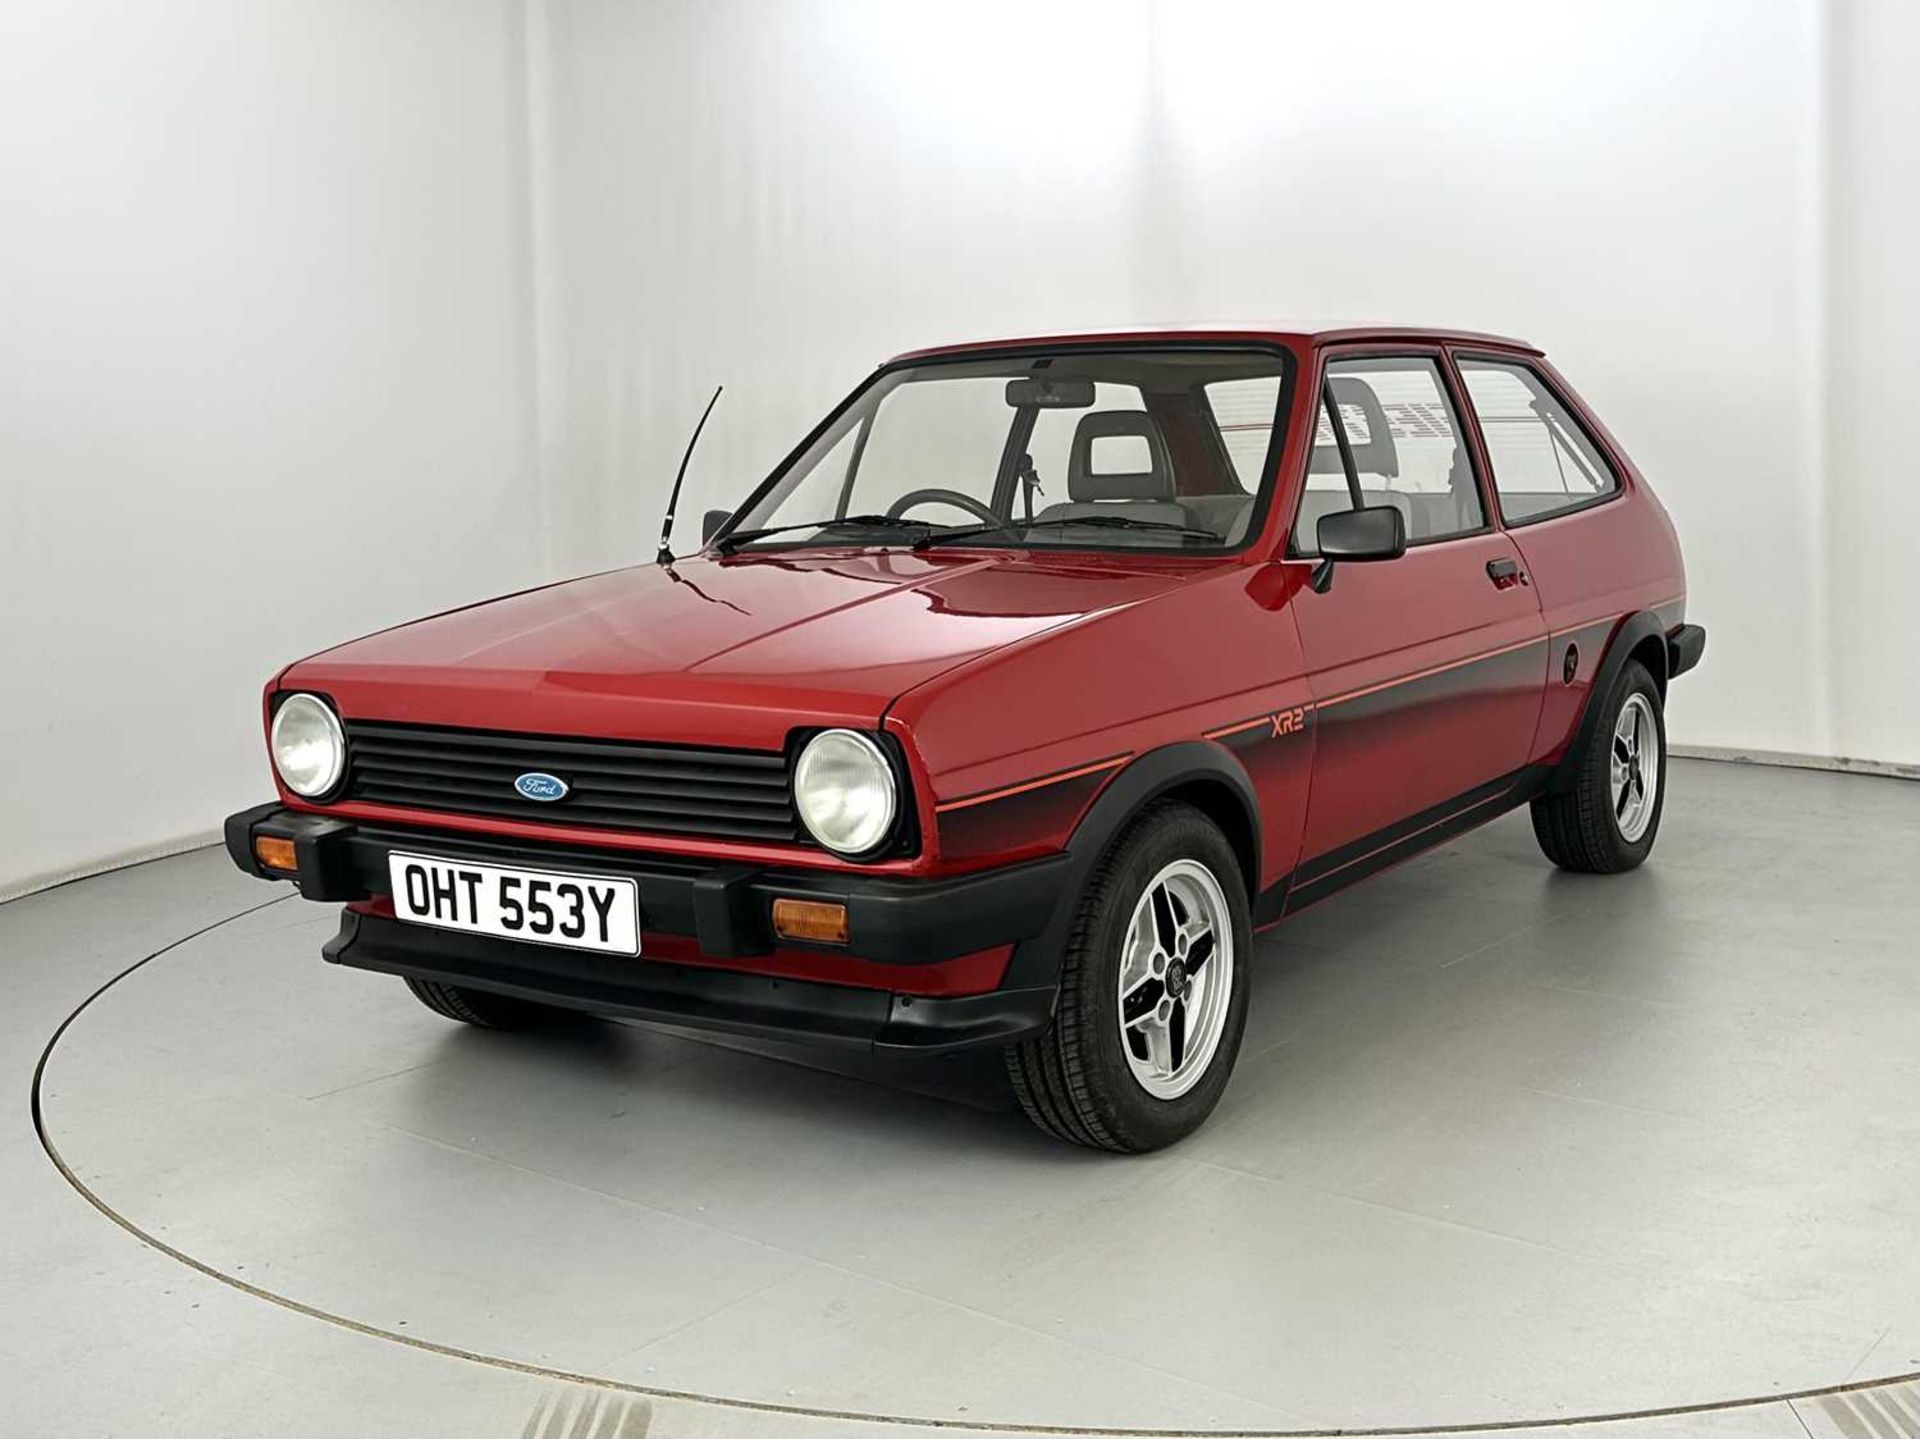 1983 Ford Fiesta - Image 3 of 31